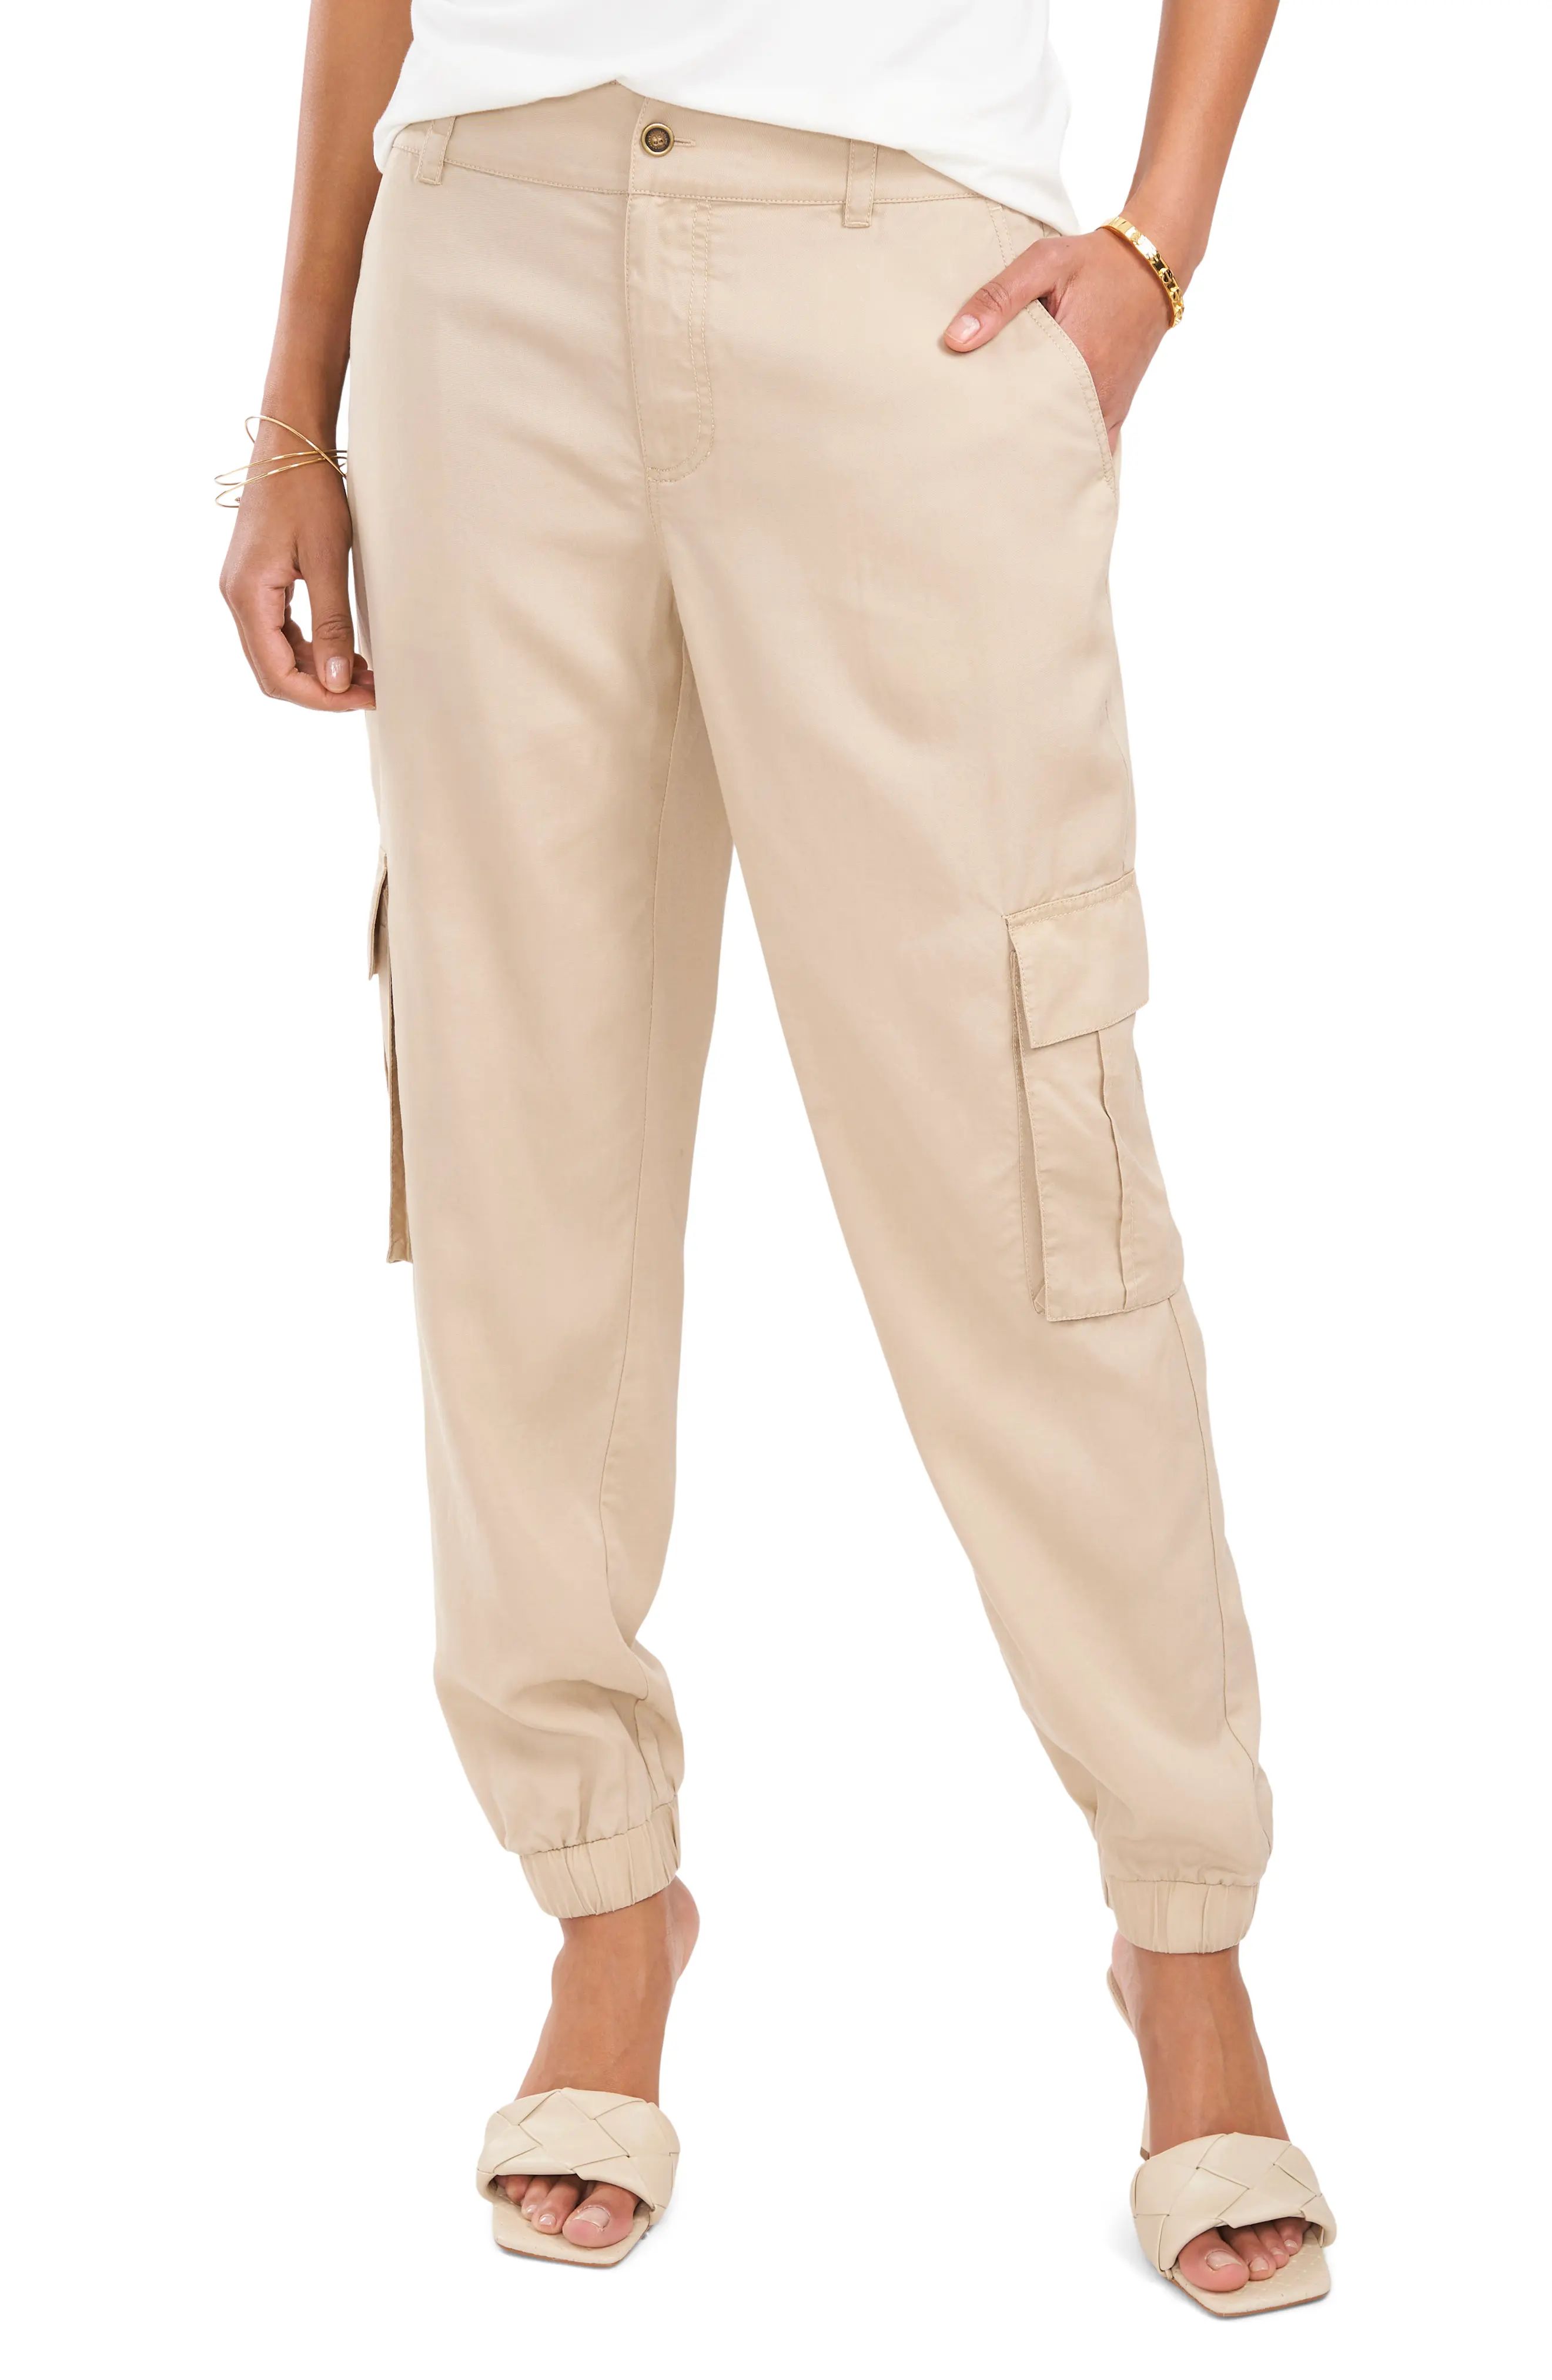 Vince Camuto Cargo Pants in Tan at Nordstrom, Size Medium | Nordstrom